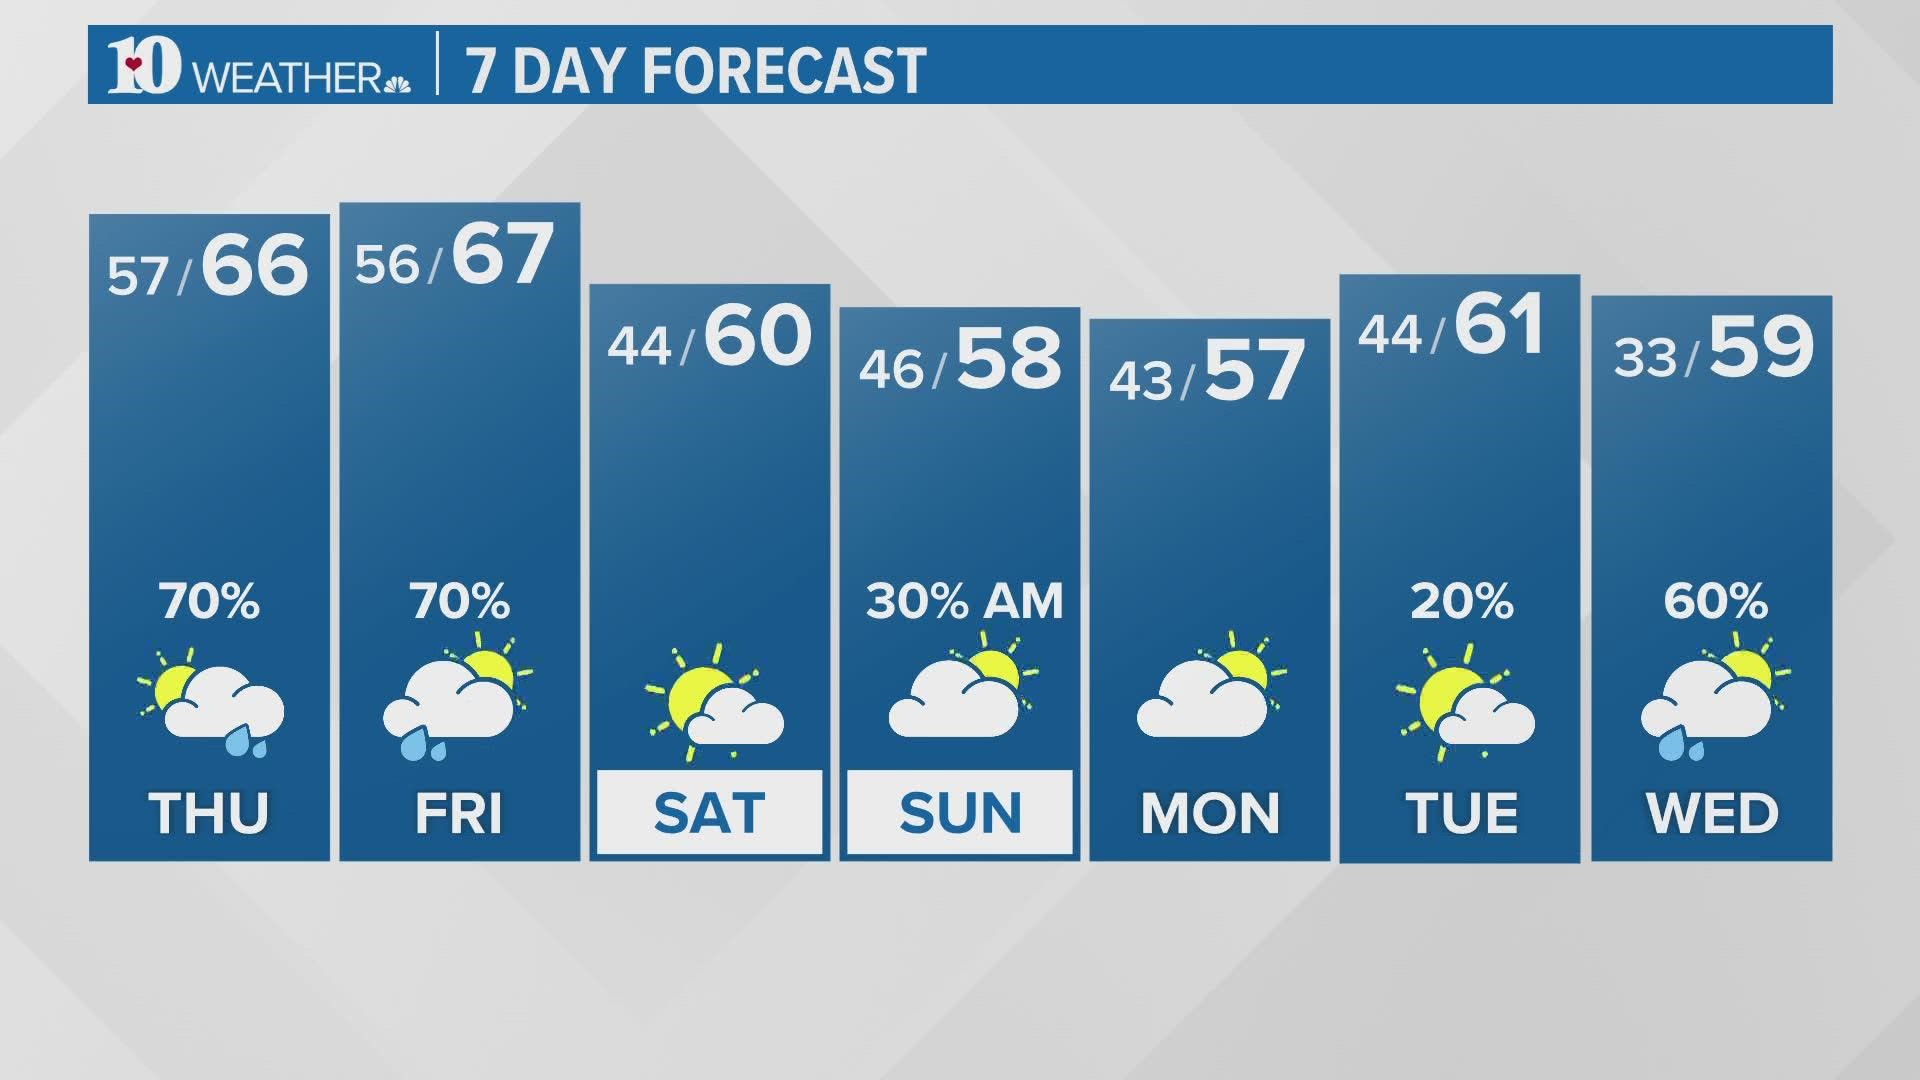 After a soggy week, we will finally see a little bit of a break in the persistent rain as we head into Saturday.